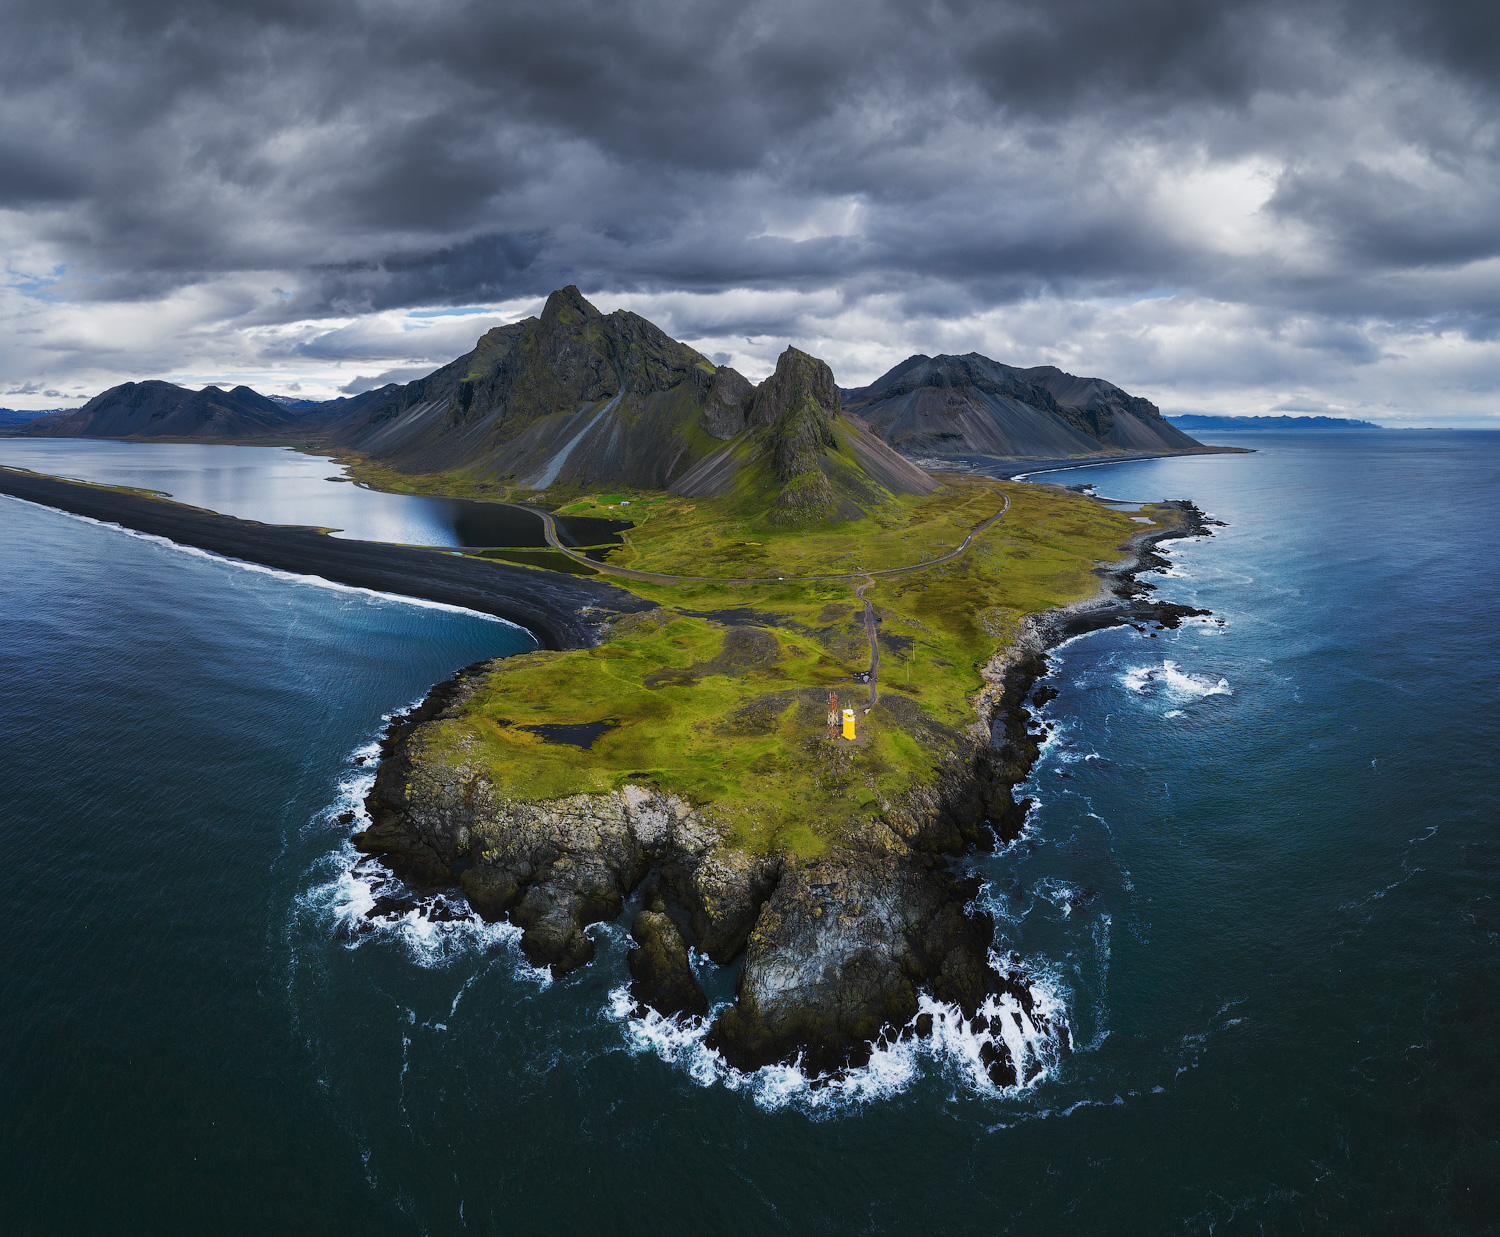 What Are the Rules For Flying a Drone in Iceland?